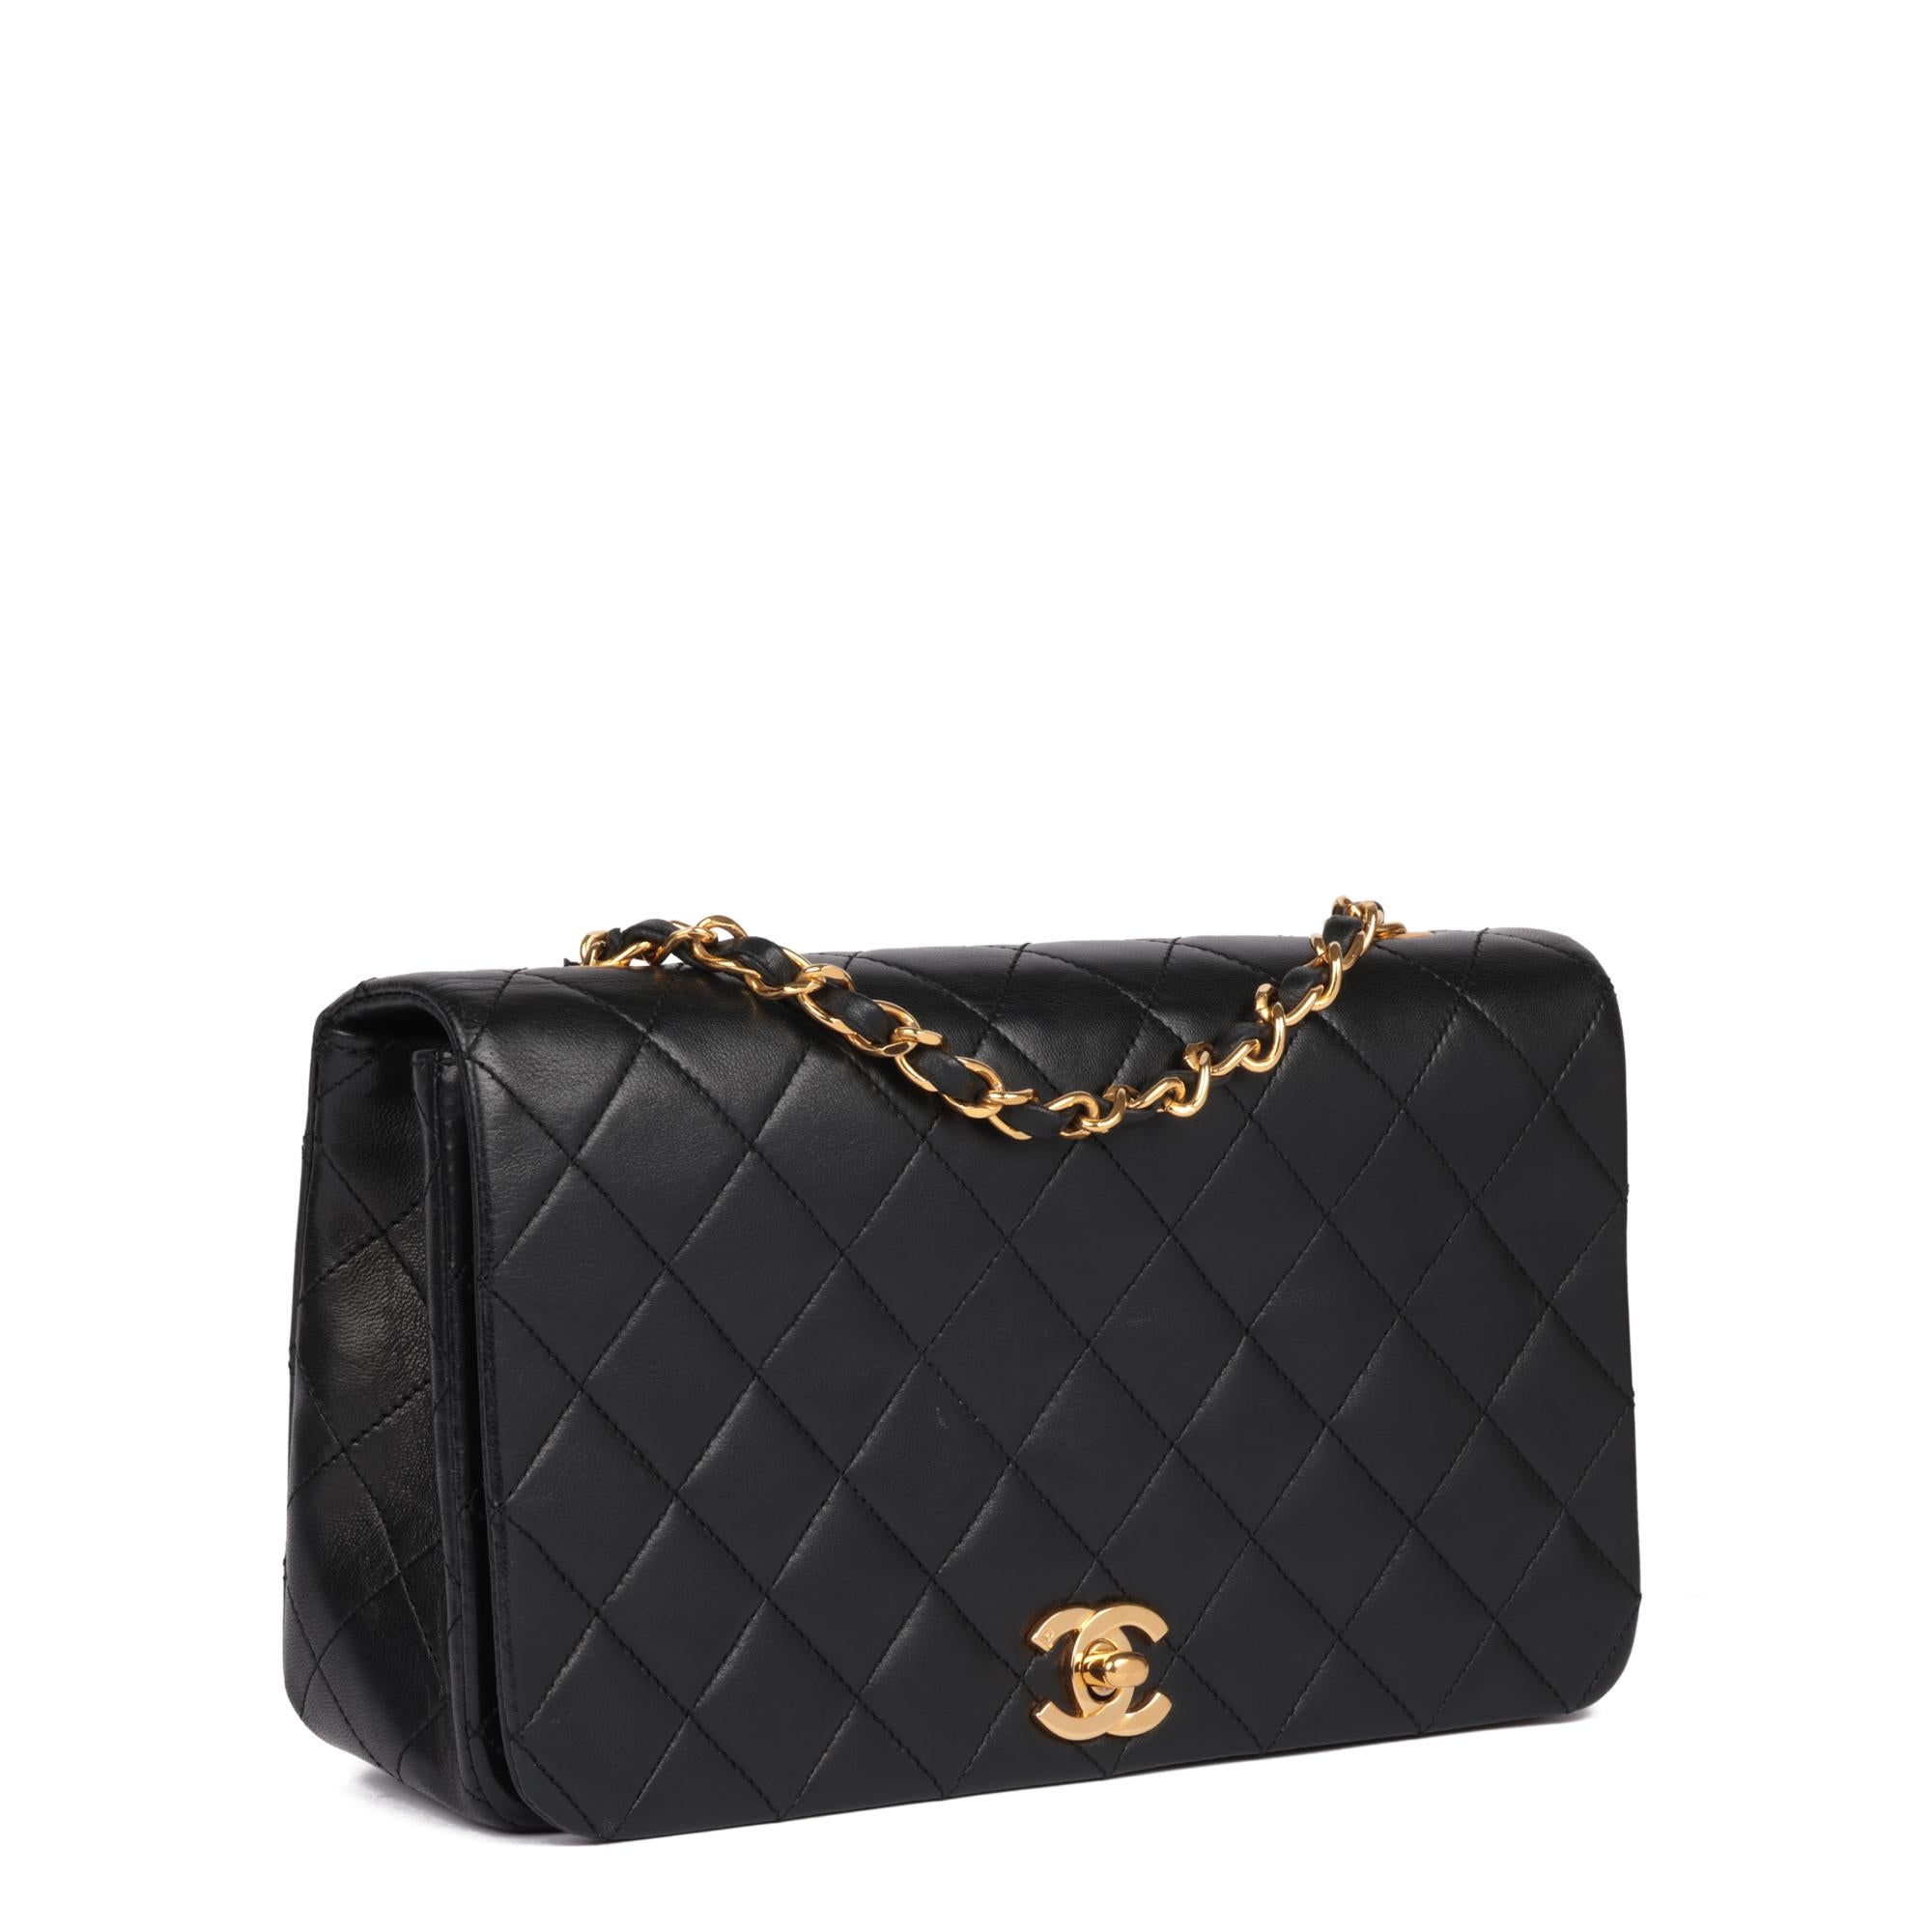 CHANEL
Black Quilted Lambskin Vintage Small Classic Single Full Flap Bag

Xupes Reference: HB5225
Serial Number: 1397568
Age (Circa): 1990
Accompanied By: Chanel Dust Bag, Authenticity Card
Authenticity Details: Authenticity Card, Serial Sticker